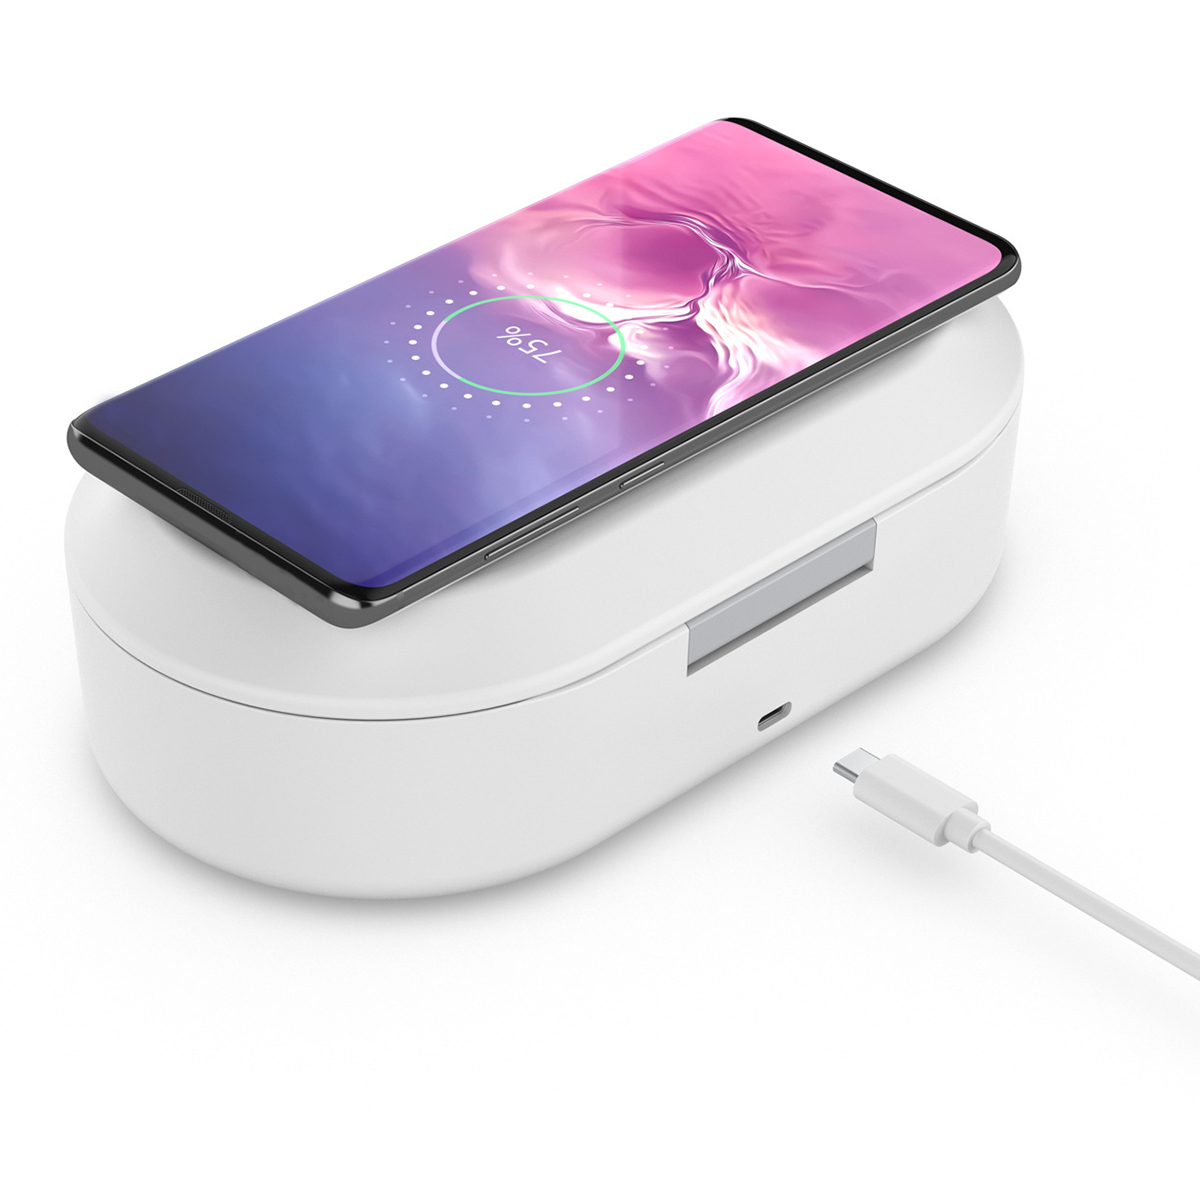 15W-Portable-Multifunctional-Phone-Disinfection-Box-Cleaner-Wireless-Charger-1730019-5